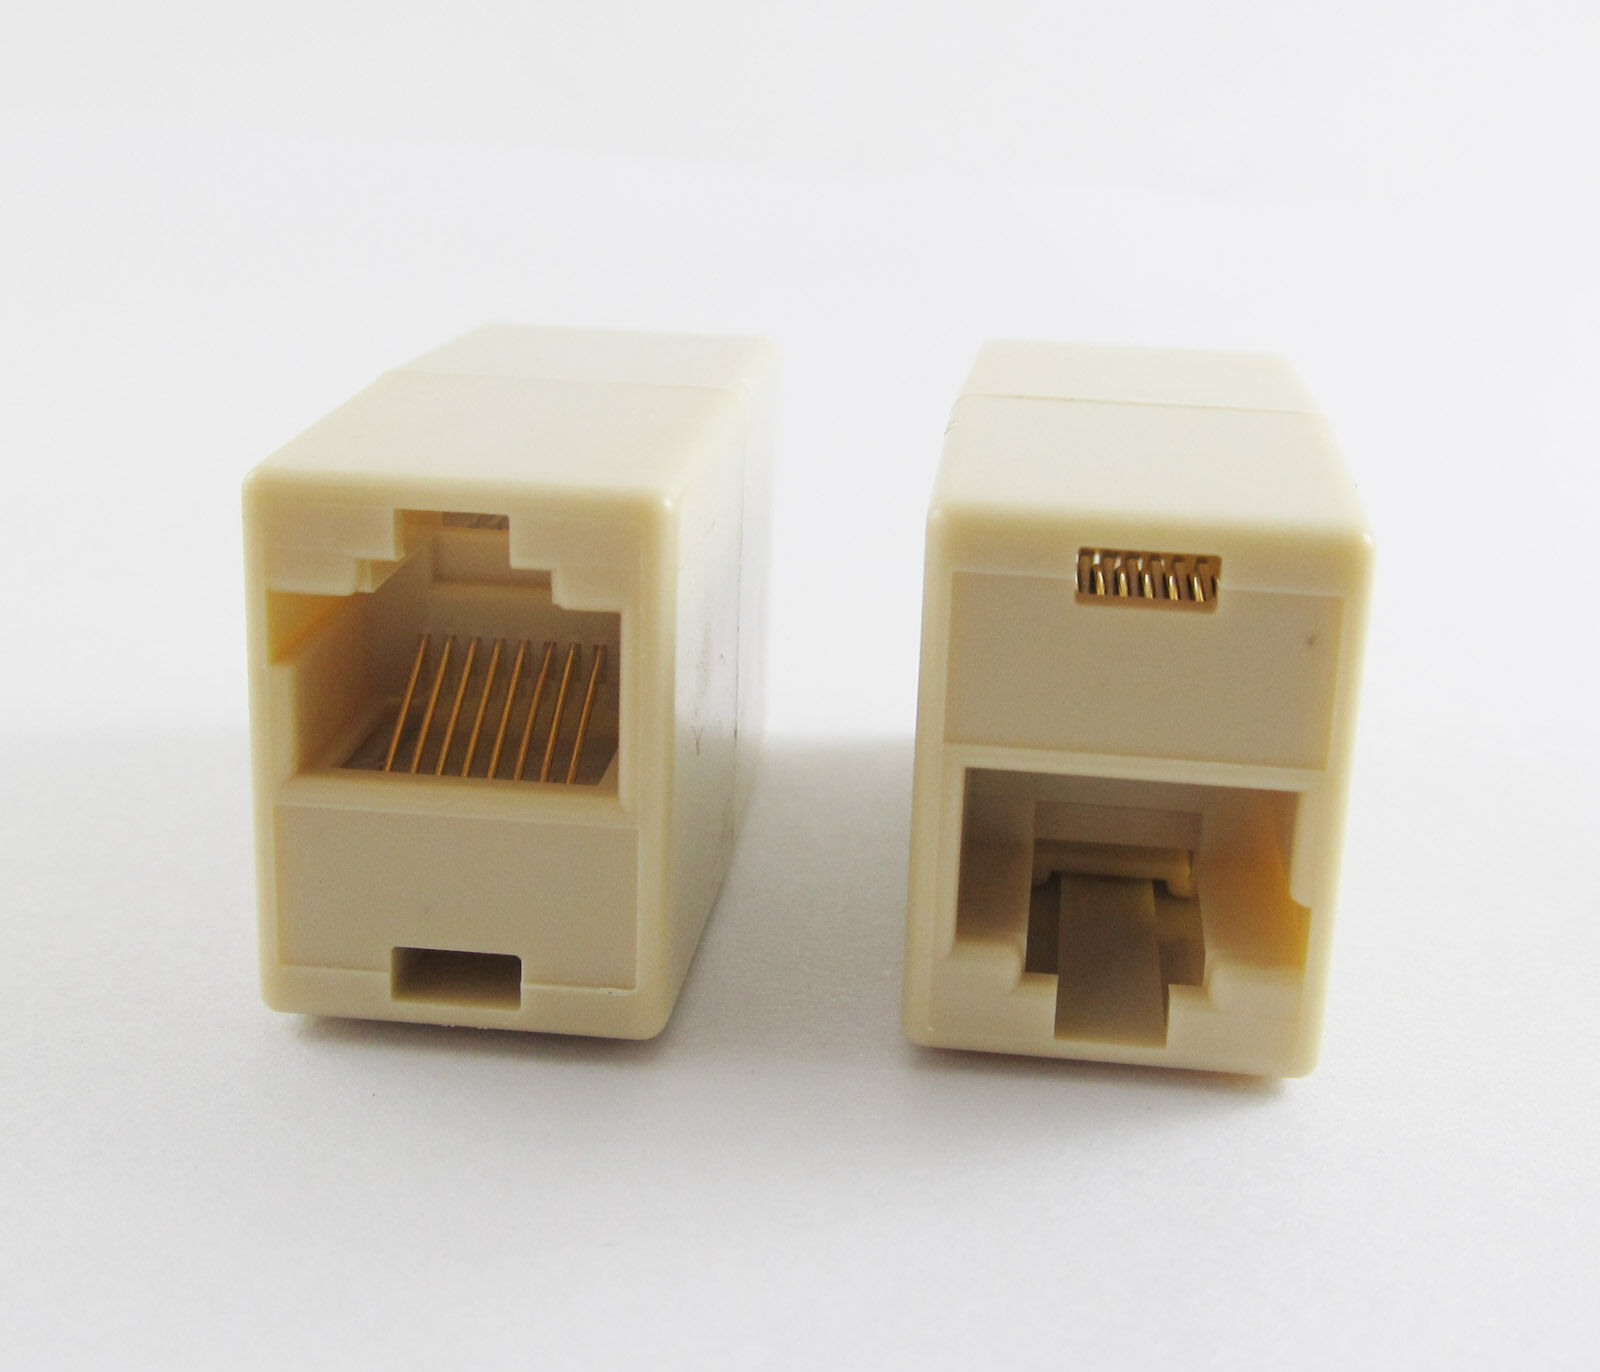 10x RJ45 CAT5 Network Cable Line Connector Adapter Extender Plug Coupler Joiner